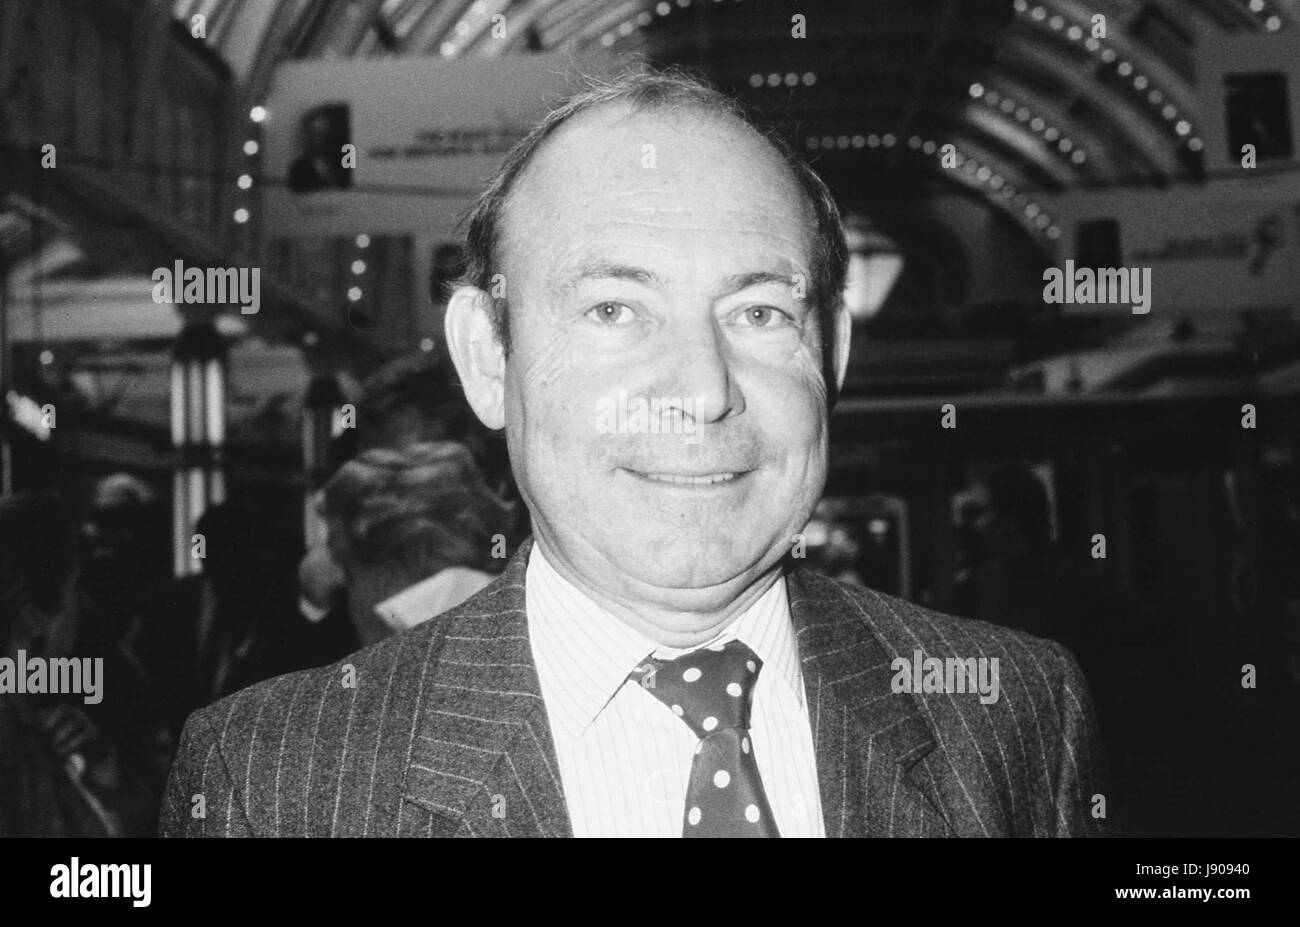 Robin Esser, former Editor of the Sunday Express newspaper, attends the Conservative party conference in Blackpool, England on October 10, 1989. Stock Photo